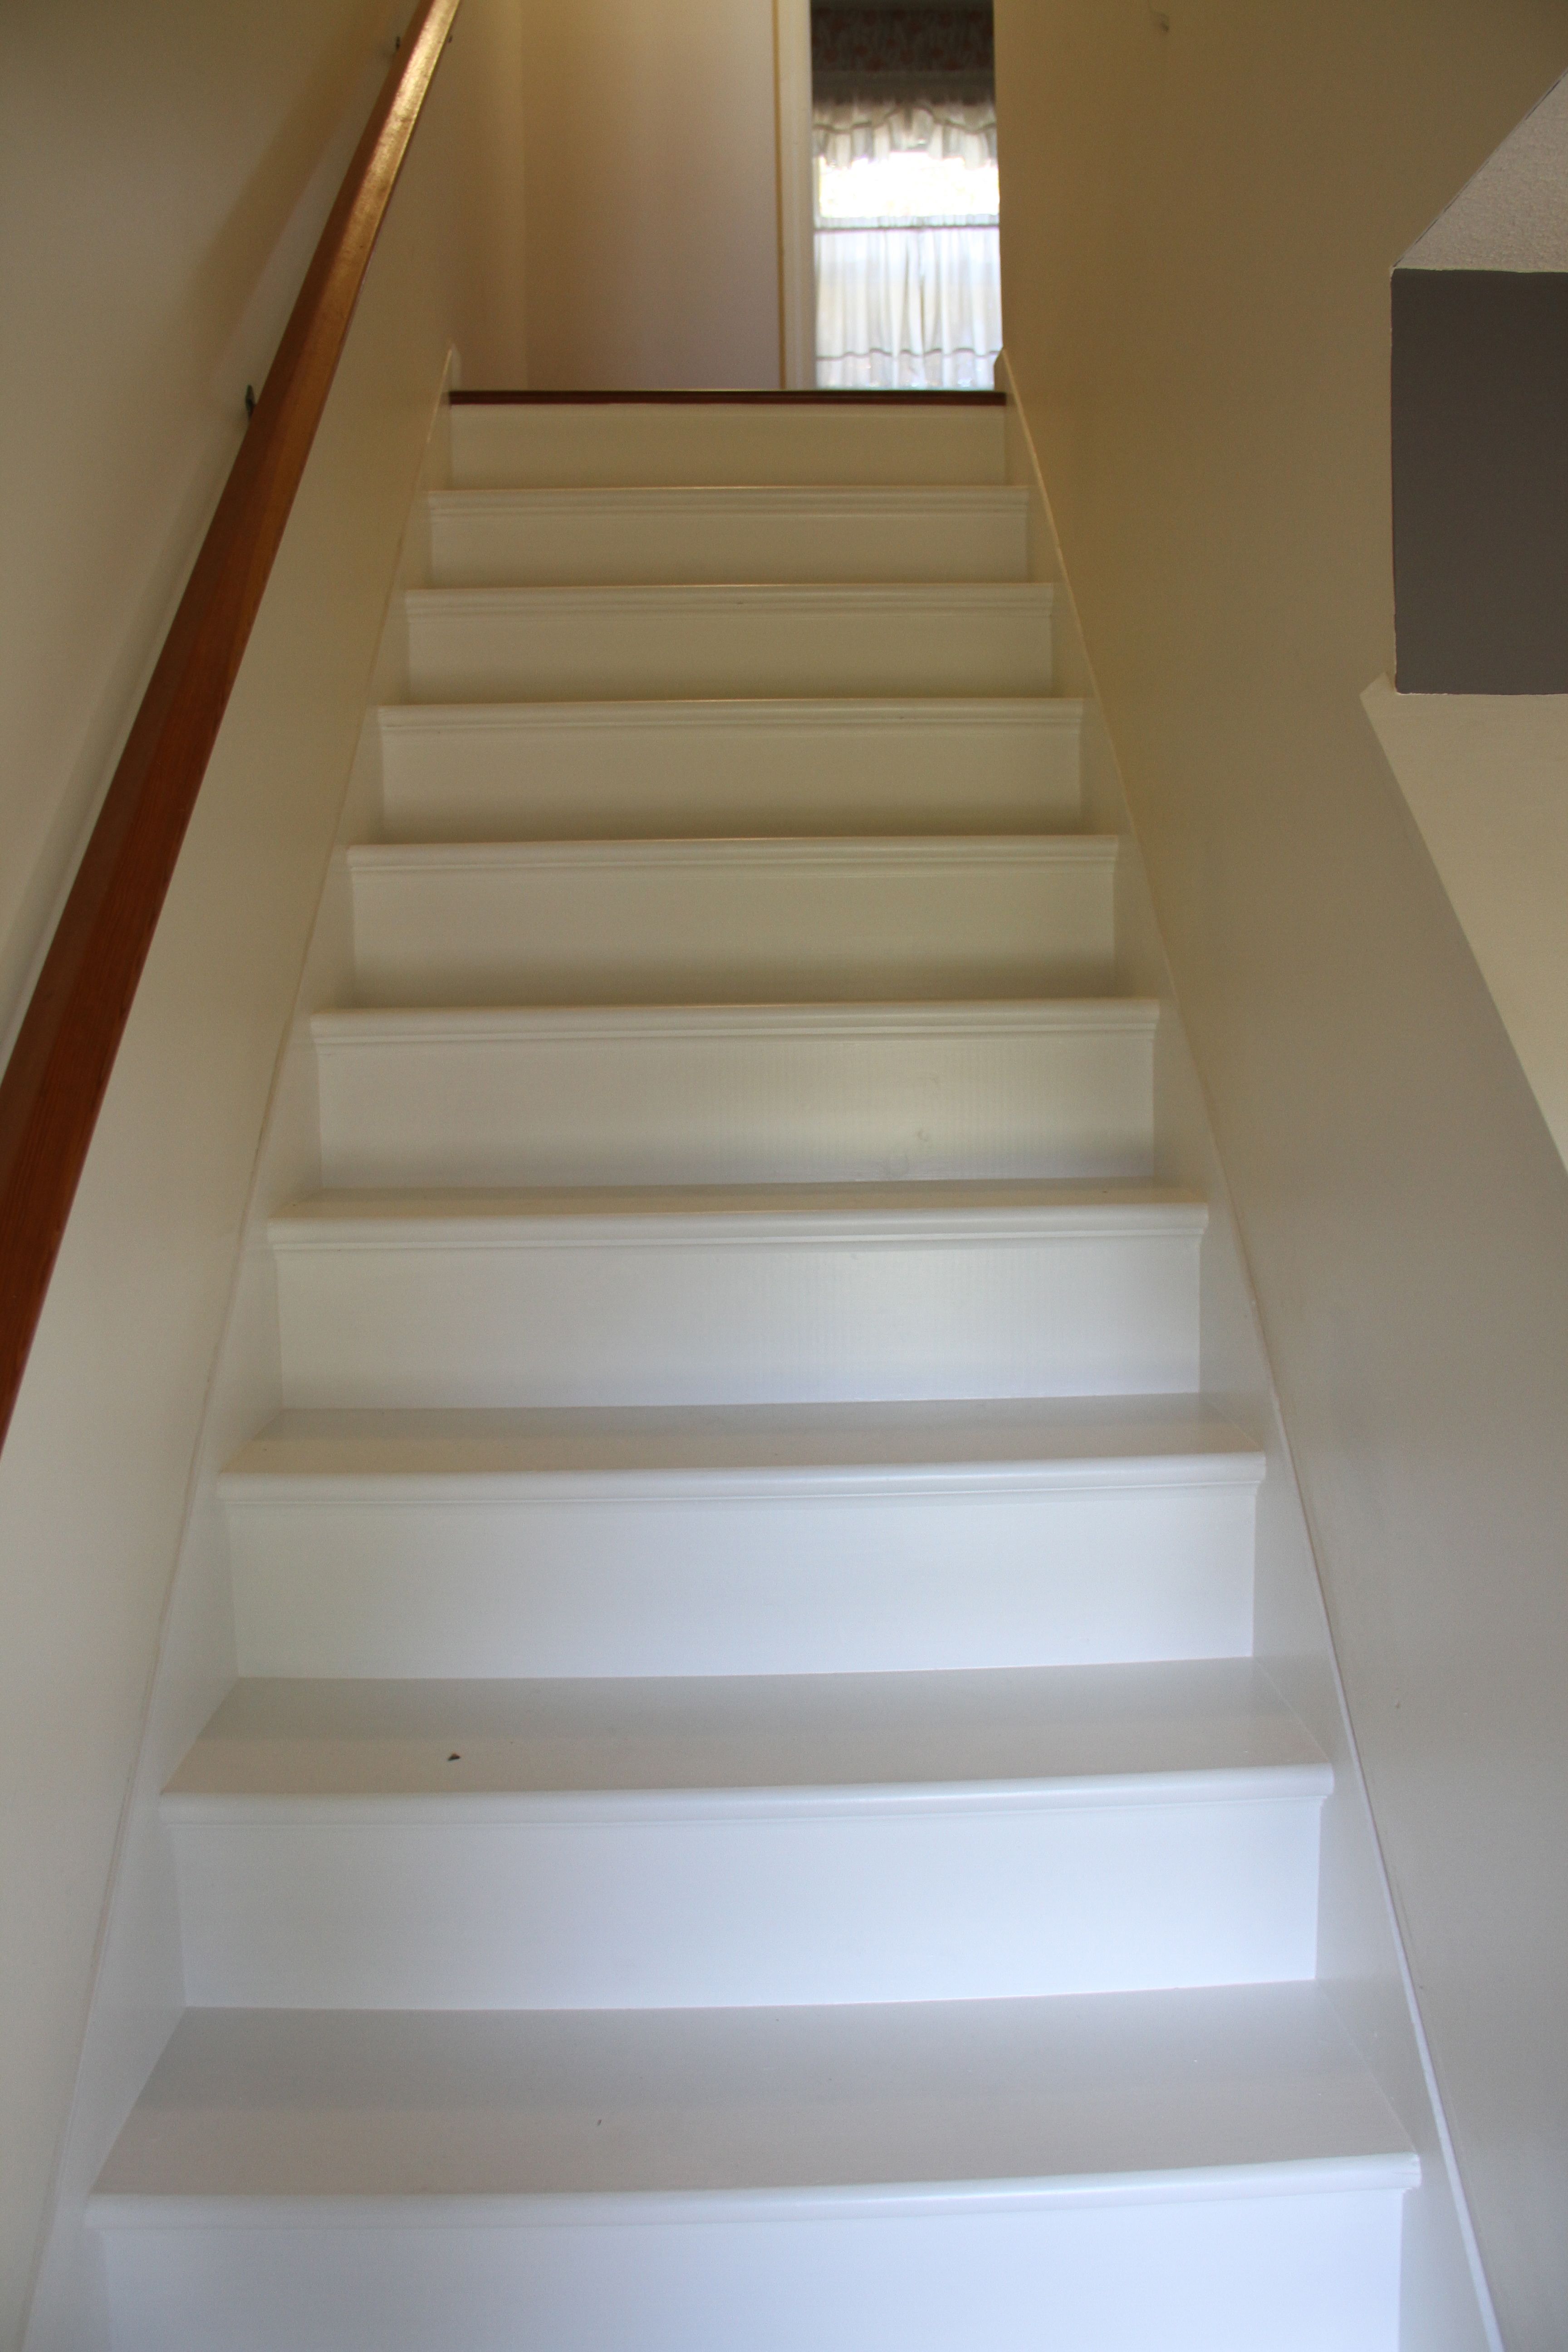 AFTER: These stairs were basically builder's stairs - stained, paint slopped on them, pitted, dented, nail and screw-holed - only ever intended to be covered in carpeting. Paint, patience and some love and attention were all they needed to get shined up again.